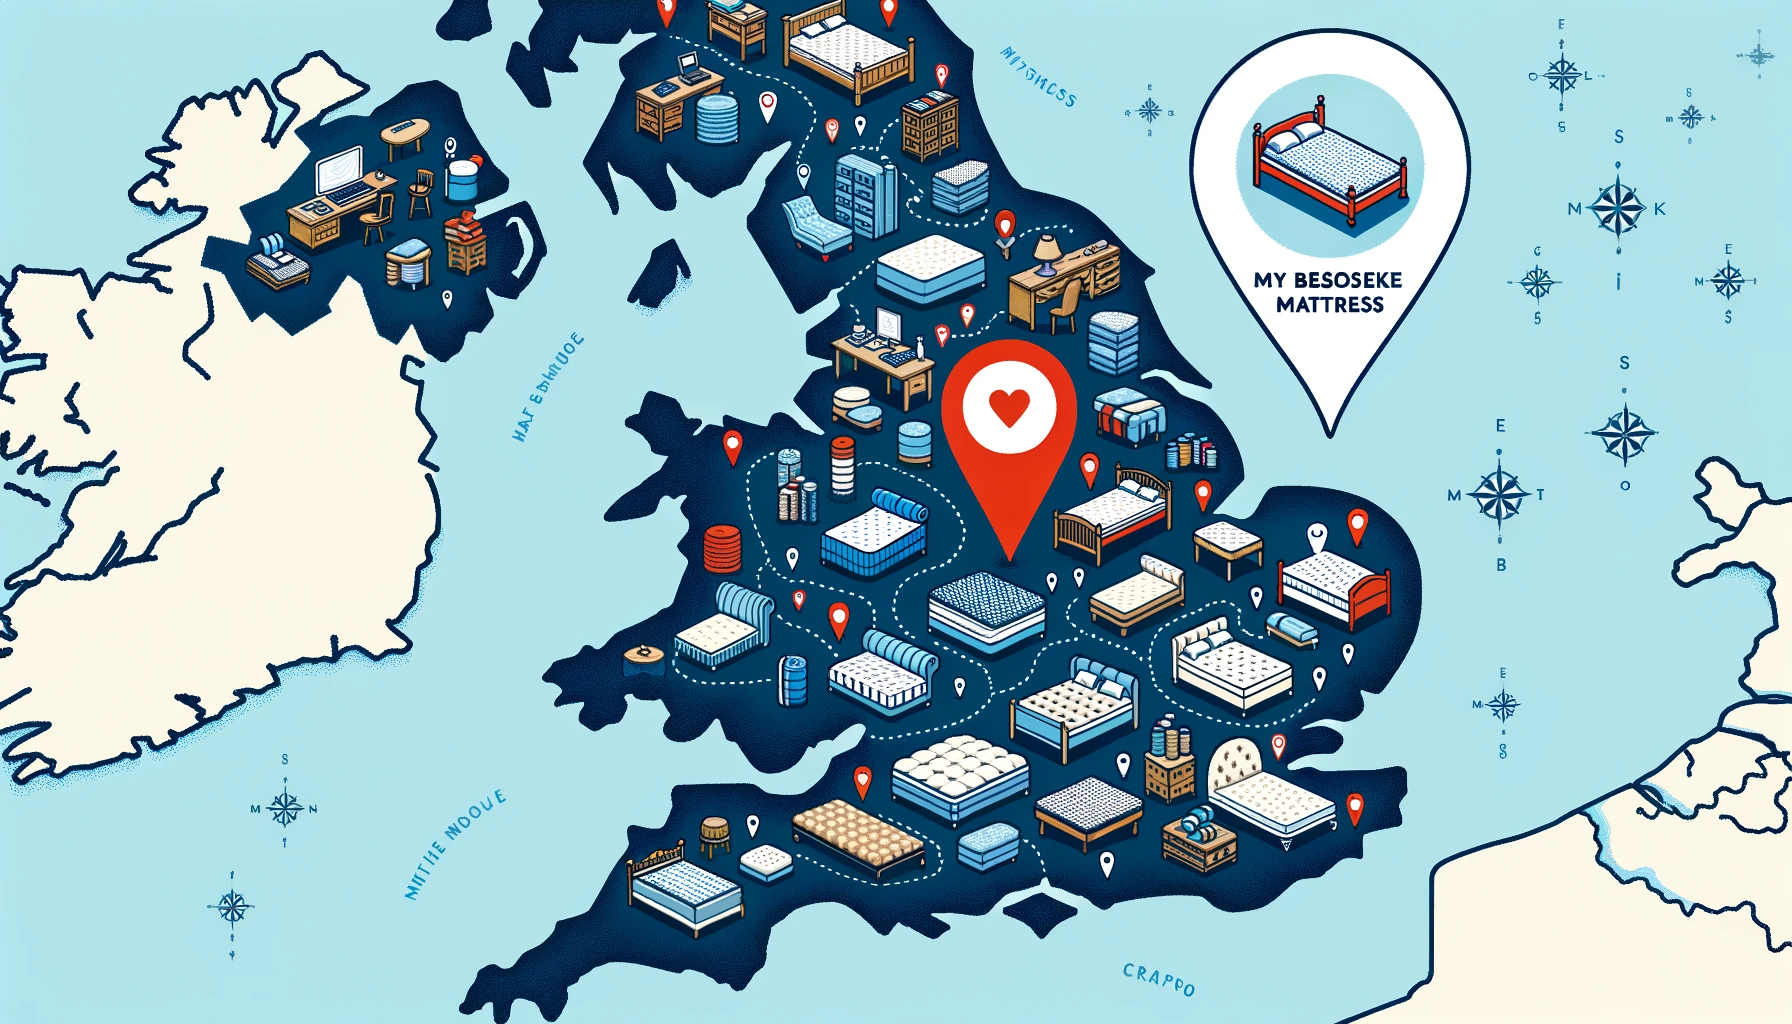 Vector illustration of a detailed UK map pinpointing various mattress workshops and craftspeople, with an emphasis on a large pin for MyBespokeMattress.com.